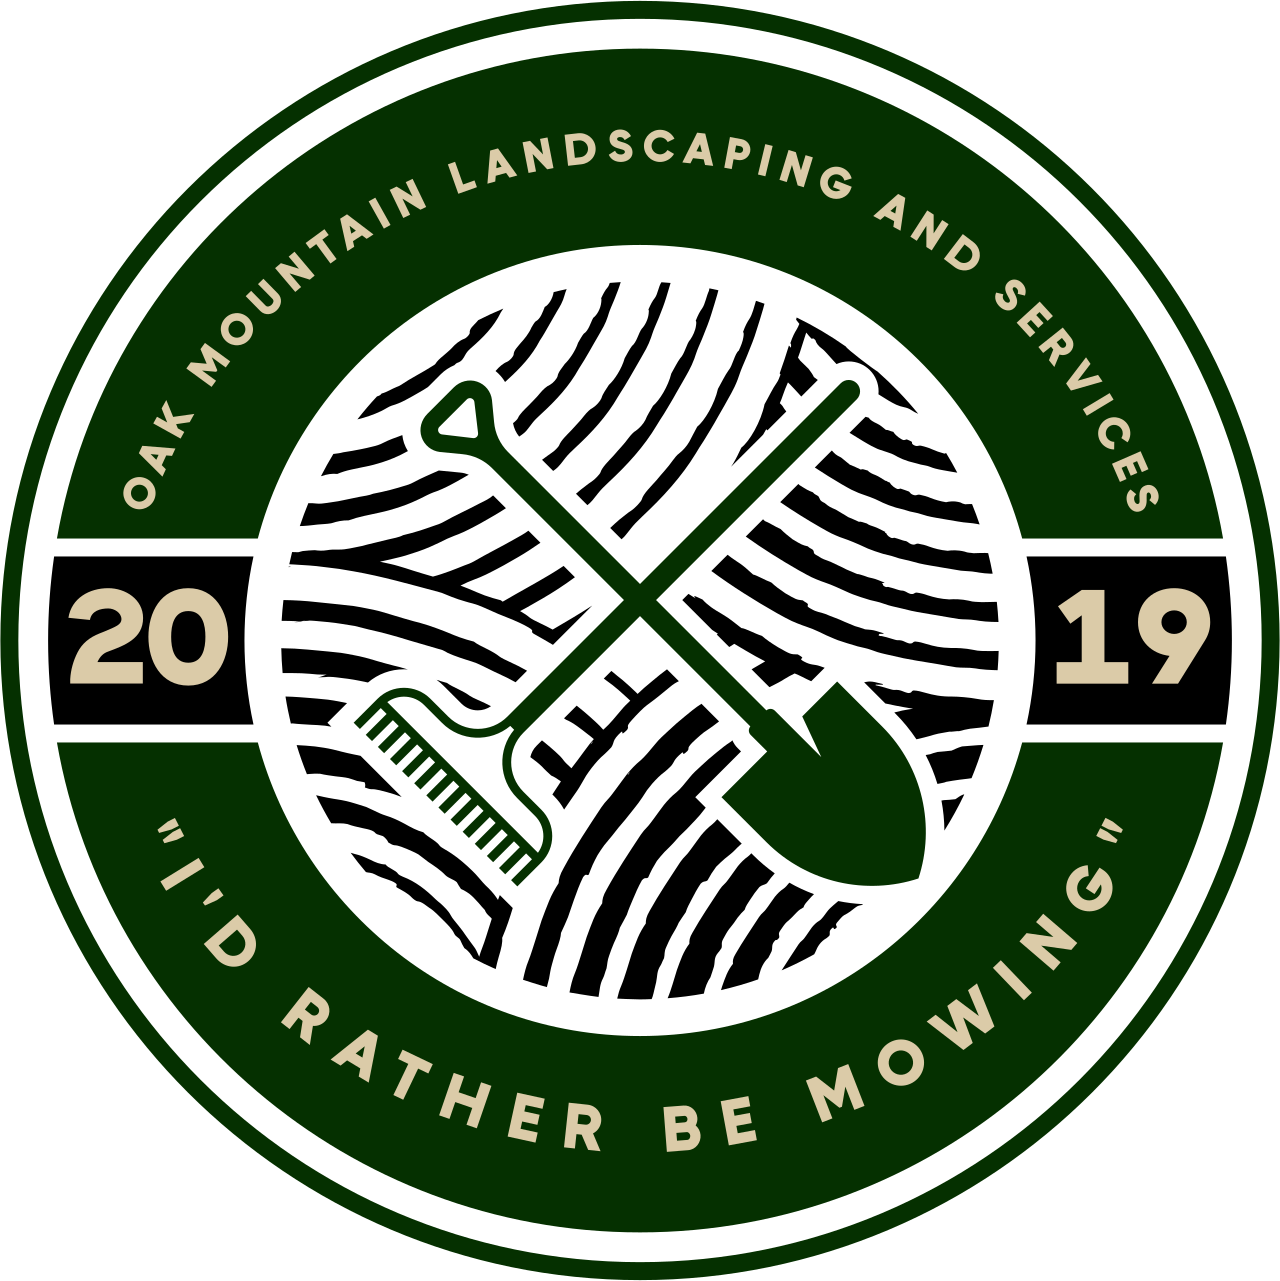 Oak Mountain Landscaping and Services's web page